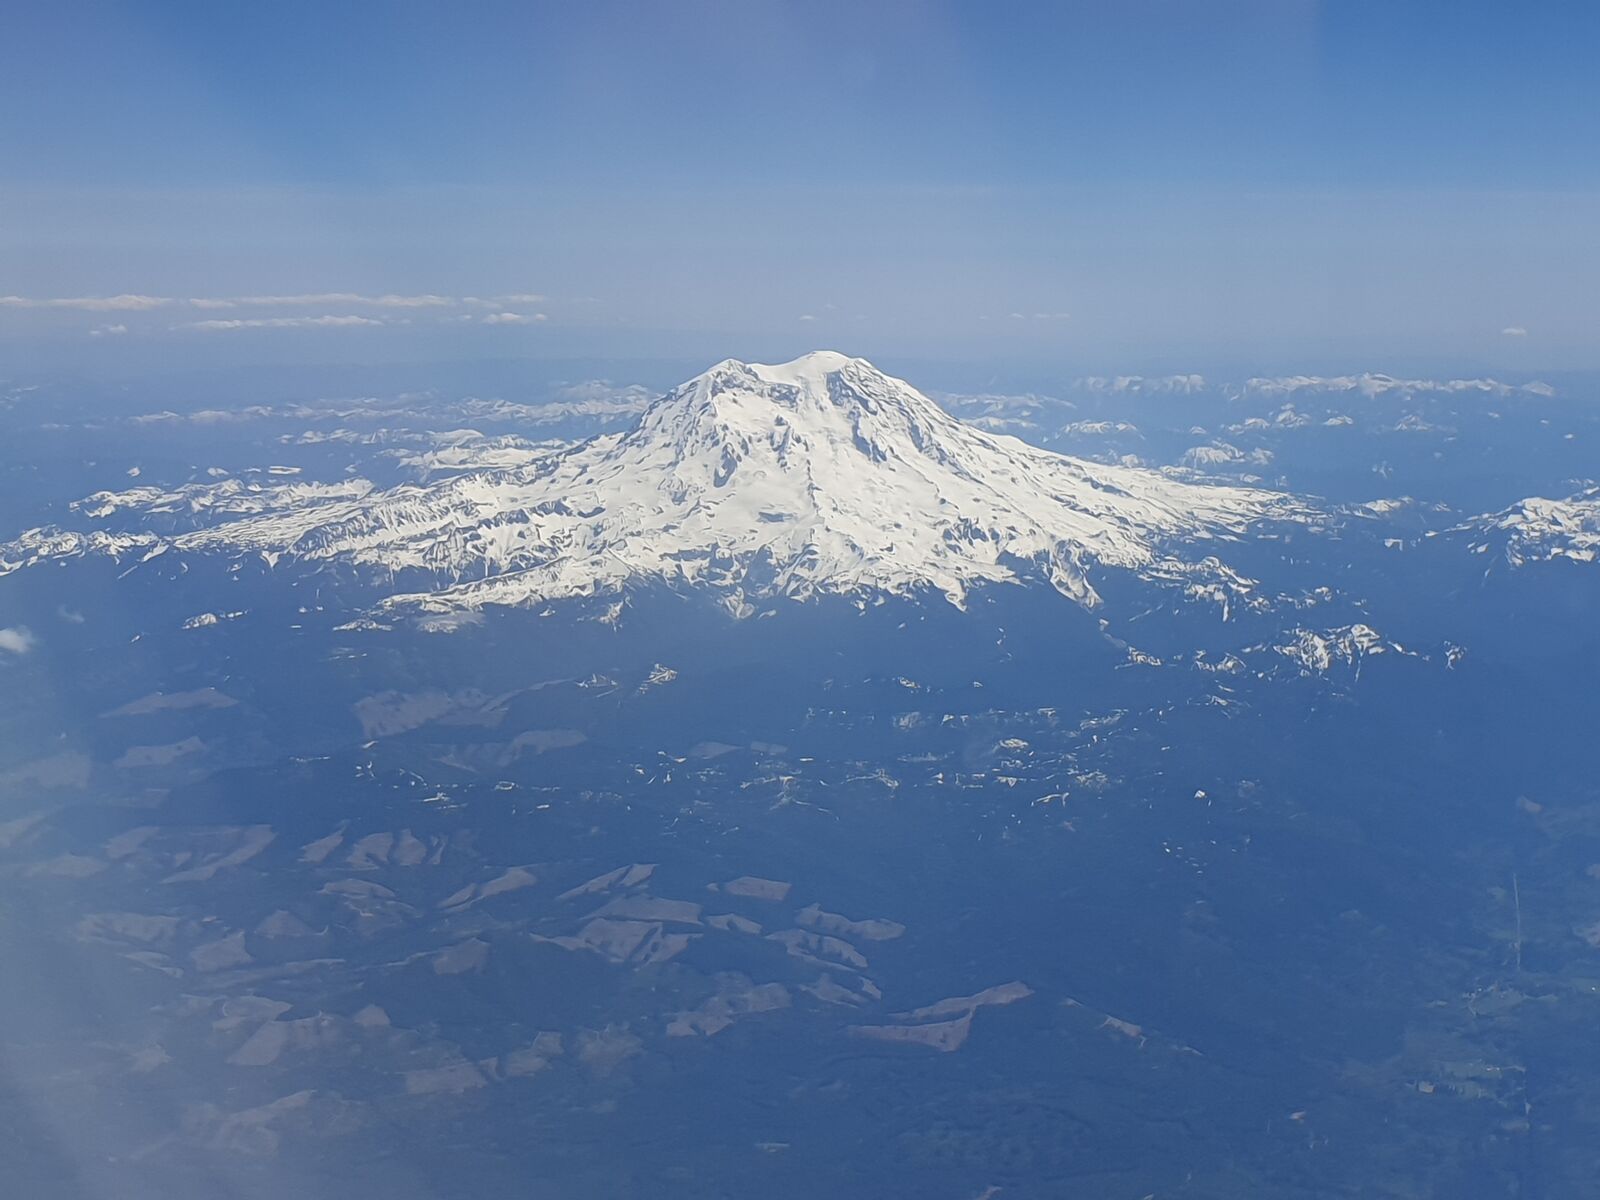 On the plane to Portland, I already had a great view of the famous volcanoes of the Pacific North-West, like Mount Rainier.